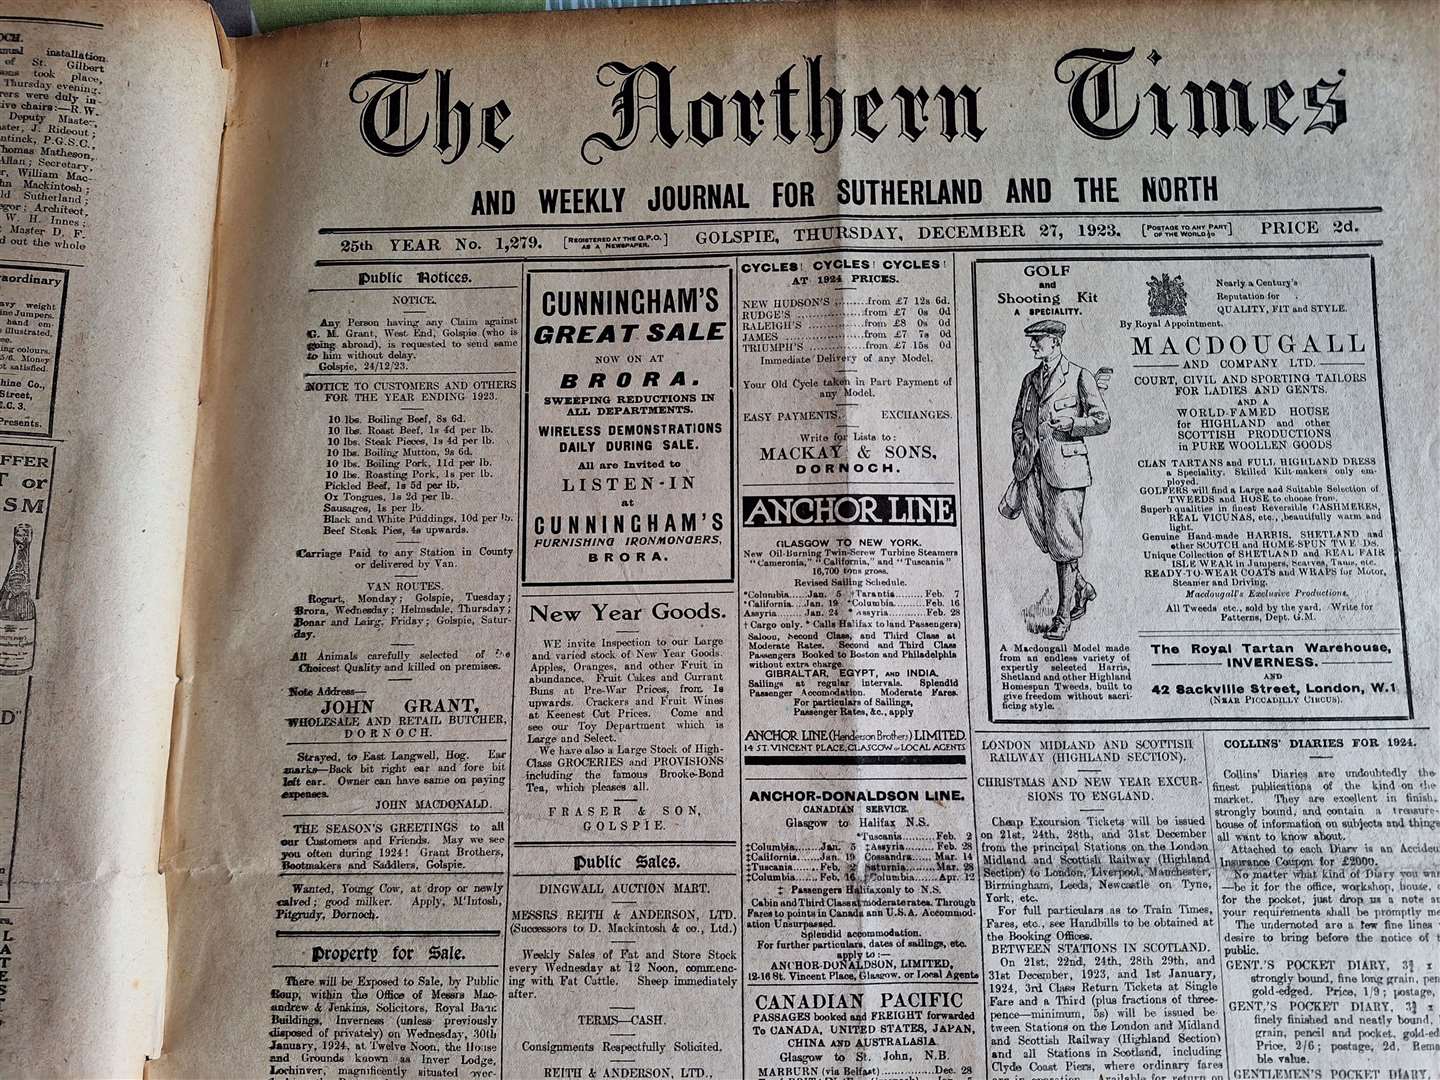 The edition of December 27, 1923.